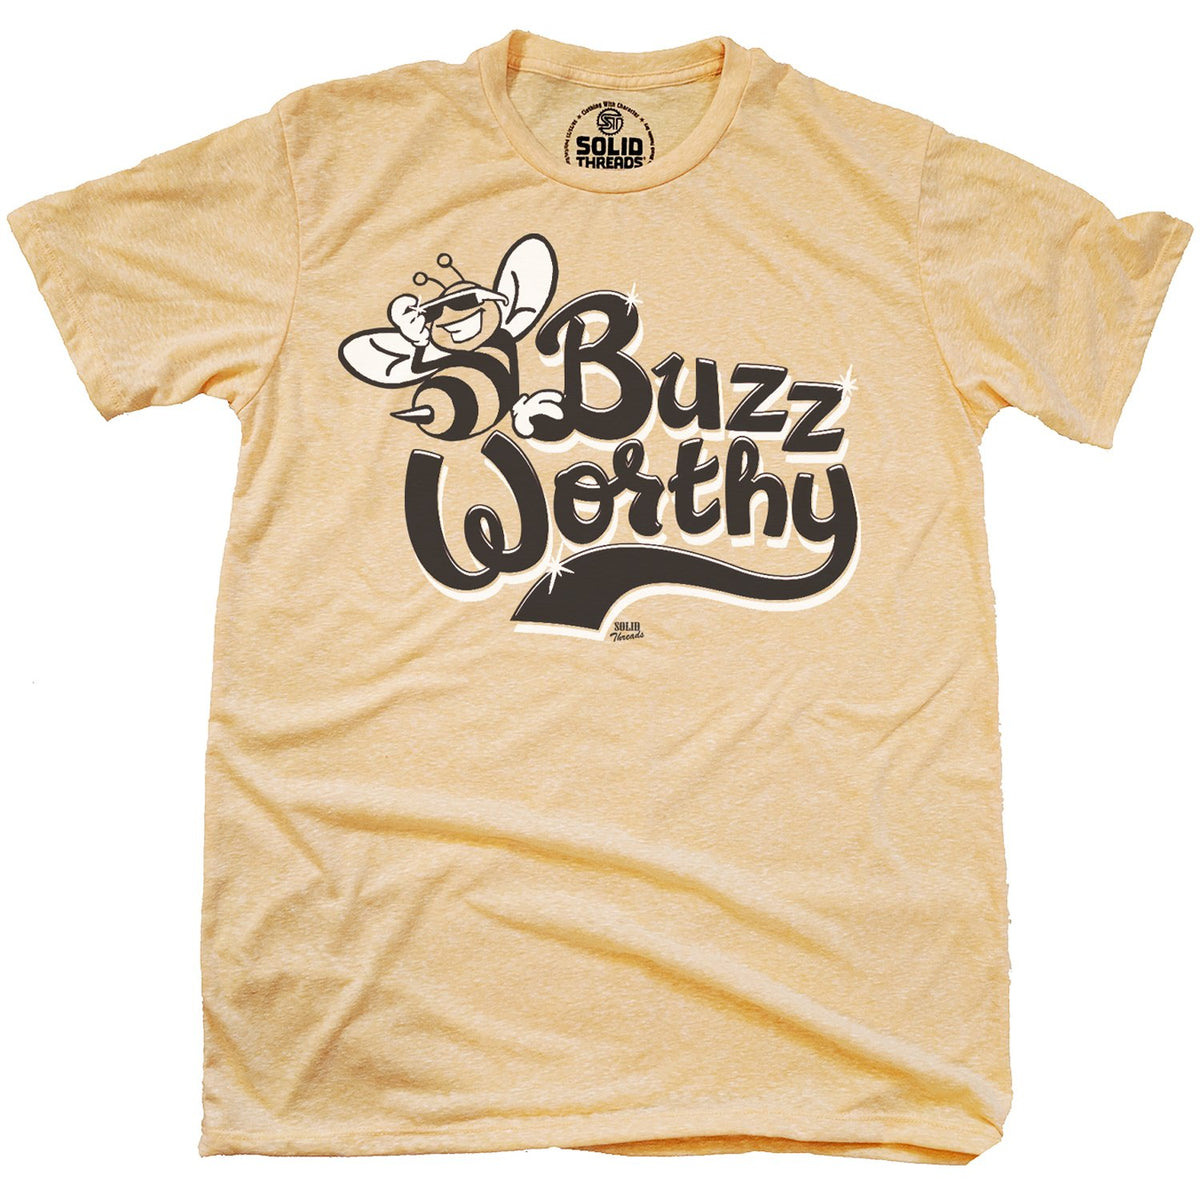 Men&#39;s Buzzworthy Cool Pollinator Graphic T-Shirt | Funny Bumble Bee Tee | Solid Threads